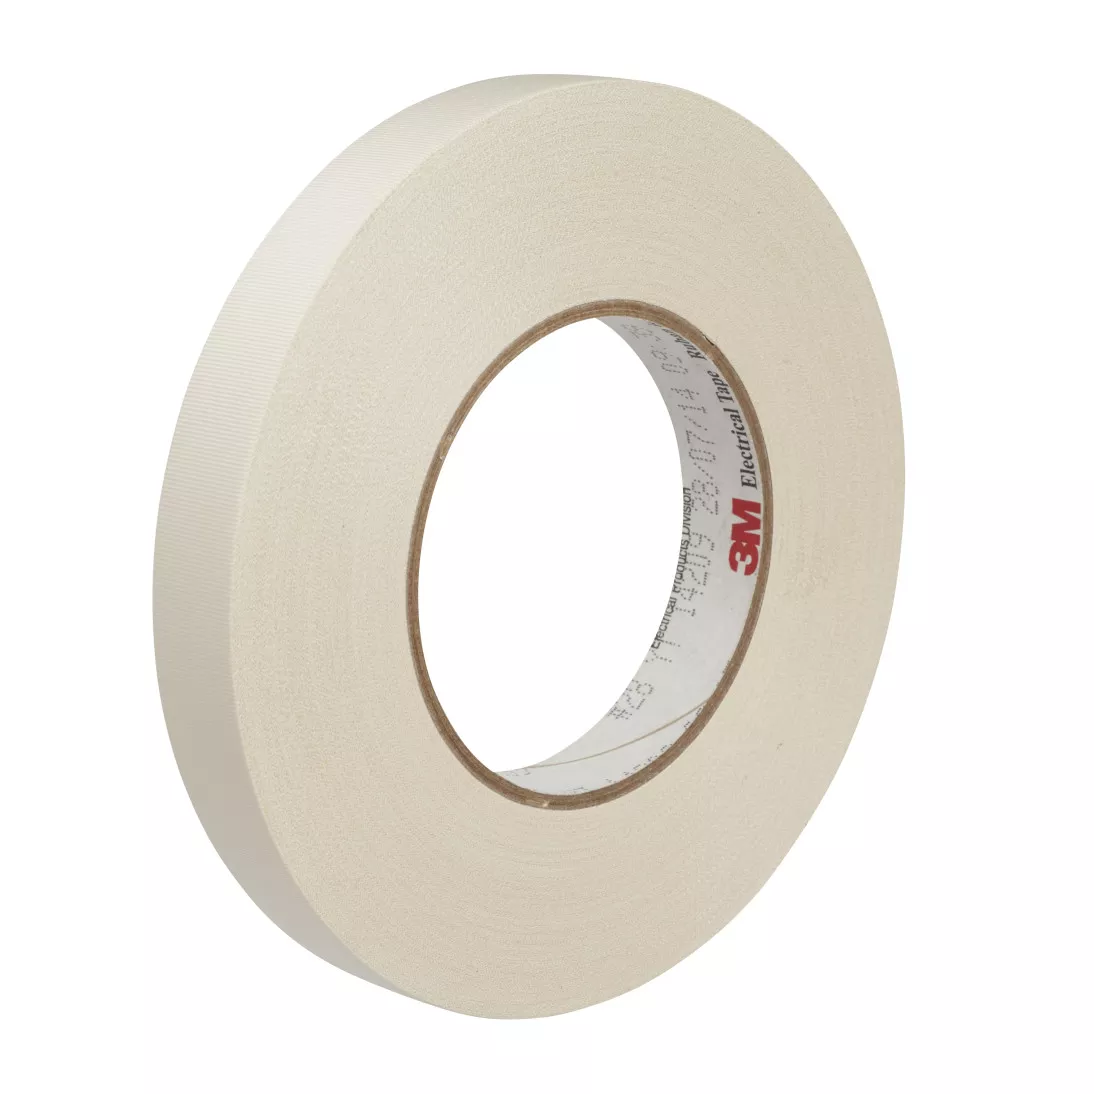 3M™ Polyester Web-Reinforced Film Electrical Tape 67, 3/4 in x 60 yd,
3-in plastic core, Log roll, 48 Rolls/Case